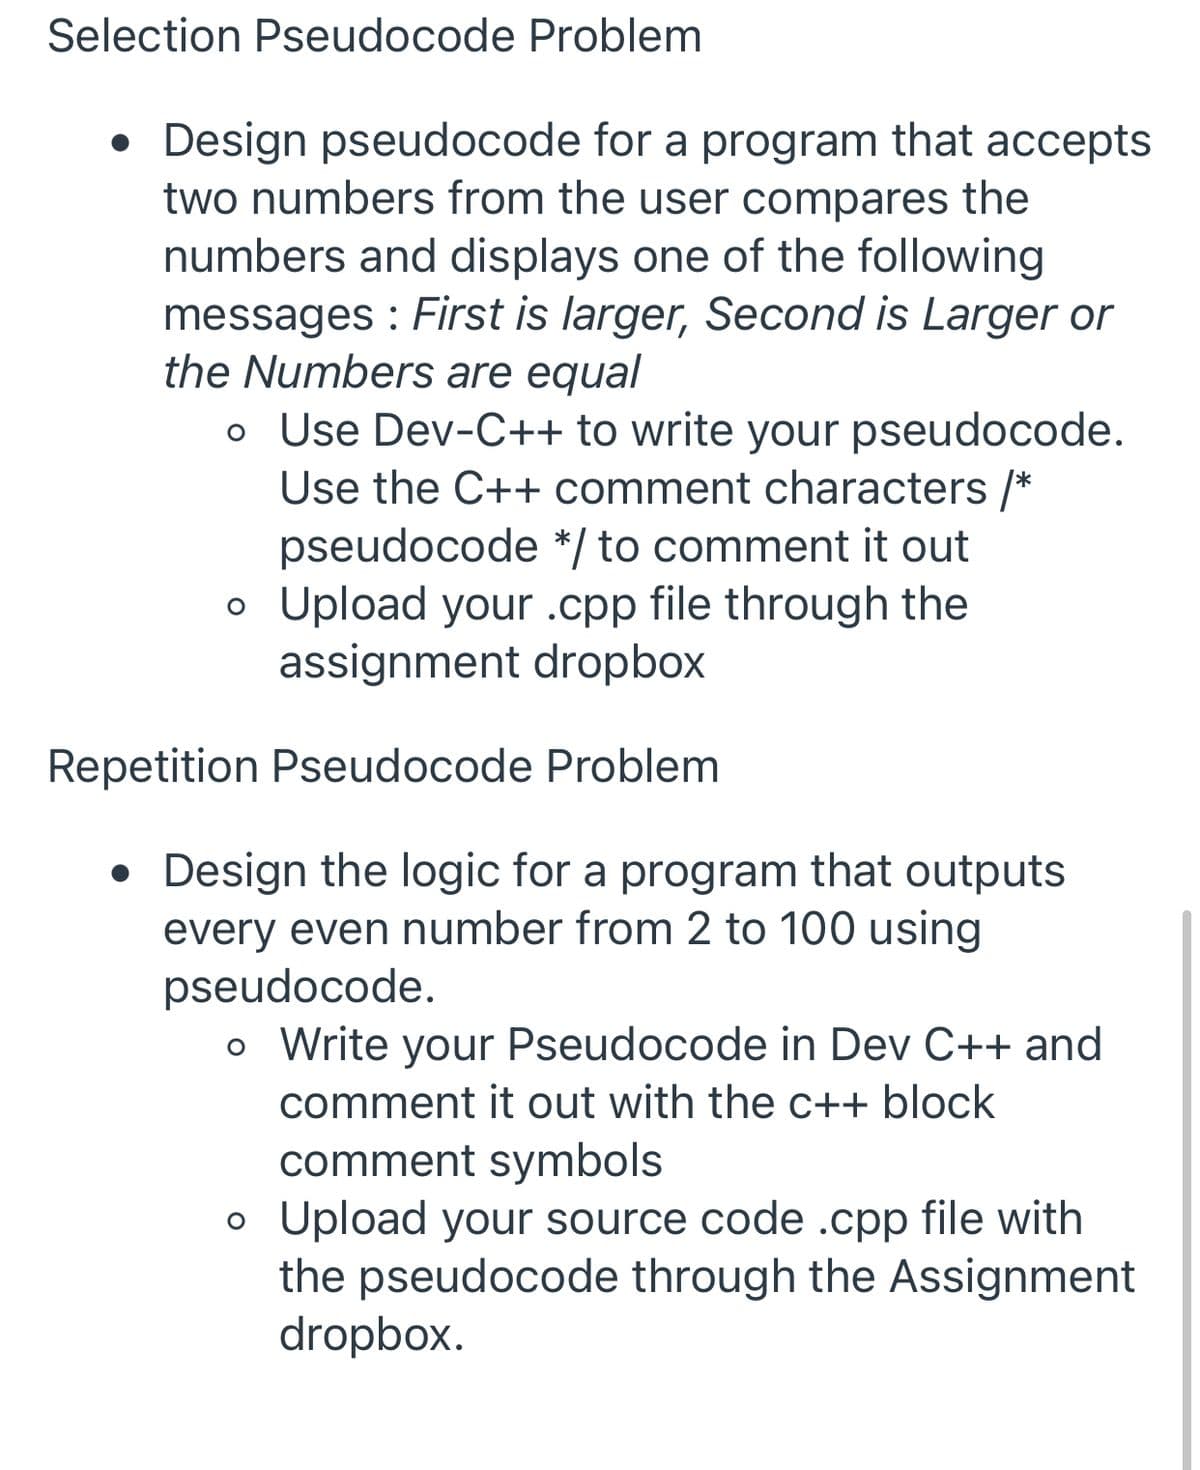 Selection Pseudocode Problem
• Design pseudocode for a program that accepts
two numbers from the user compares the
numbers and displays one of the following
messages : First is larger, Second is Larger or
the Numbers are equal
o Use Dev-C++ to write your pseudocode.
Use the C++ comment characters /*
pseudocode */ to comment it out
o Upload your .cpp file through the
assignment dropbox
Repetition Pseudocode Problem
Design the logic for a program that outputs
every even number from 2 to 100 using
pseudocode.
o Write your Pseudocode in Dev C++ and
comment it out with the c++ block
comment symbols
o Upload your source code .cpp file with
the pseudocode through the Assignment
dropbox.
